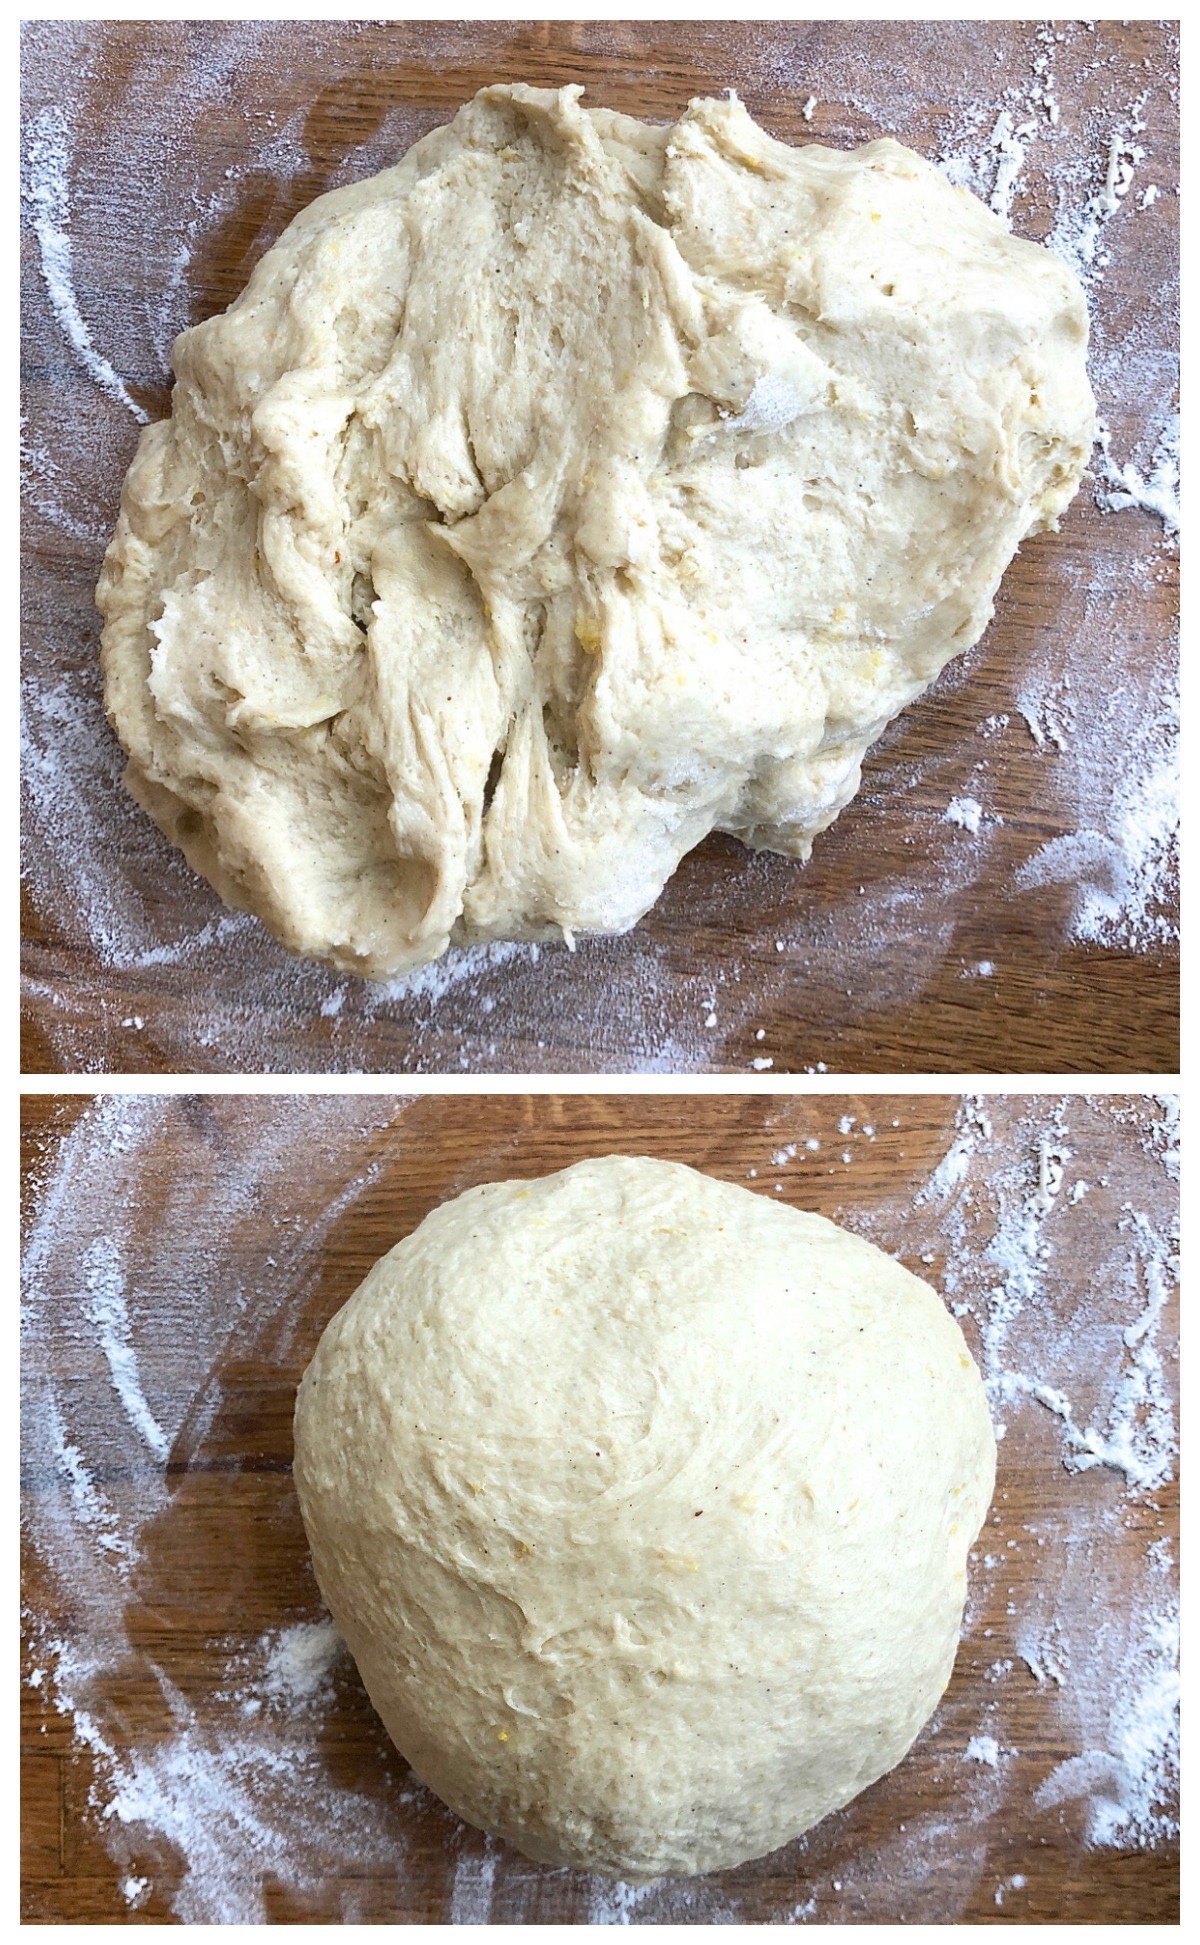 Two pictures: Stollen dough mixed together, still rough; and fully kneaded stollen dough in a smooth ball.